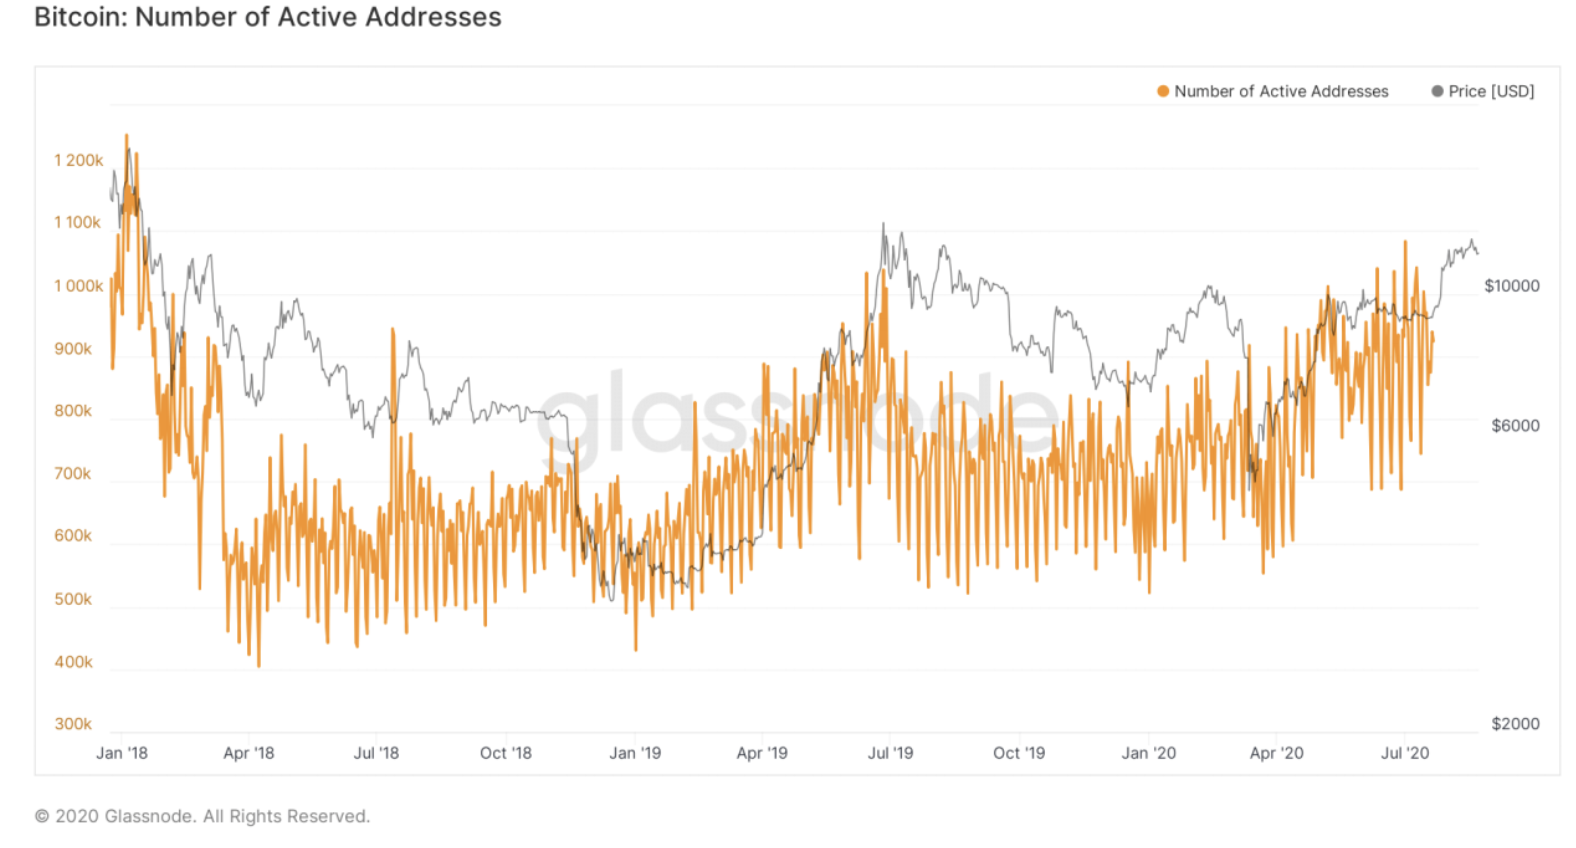 Bitcoin: Number of Active Addresses